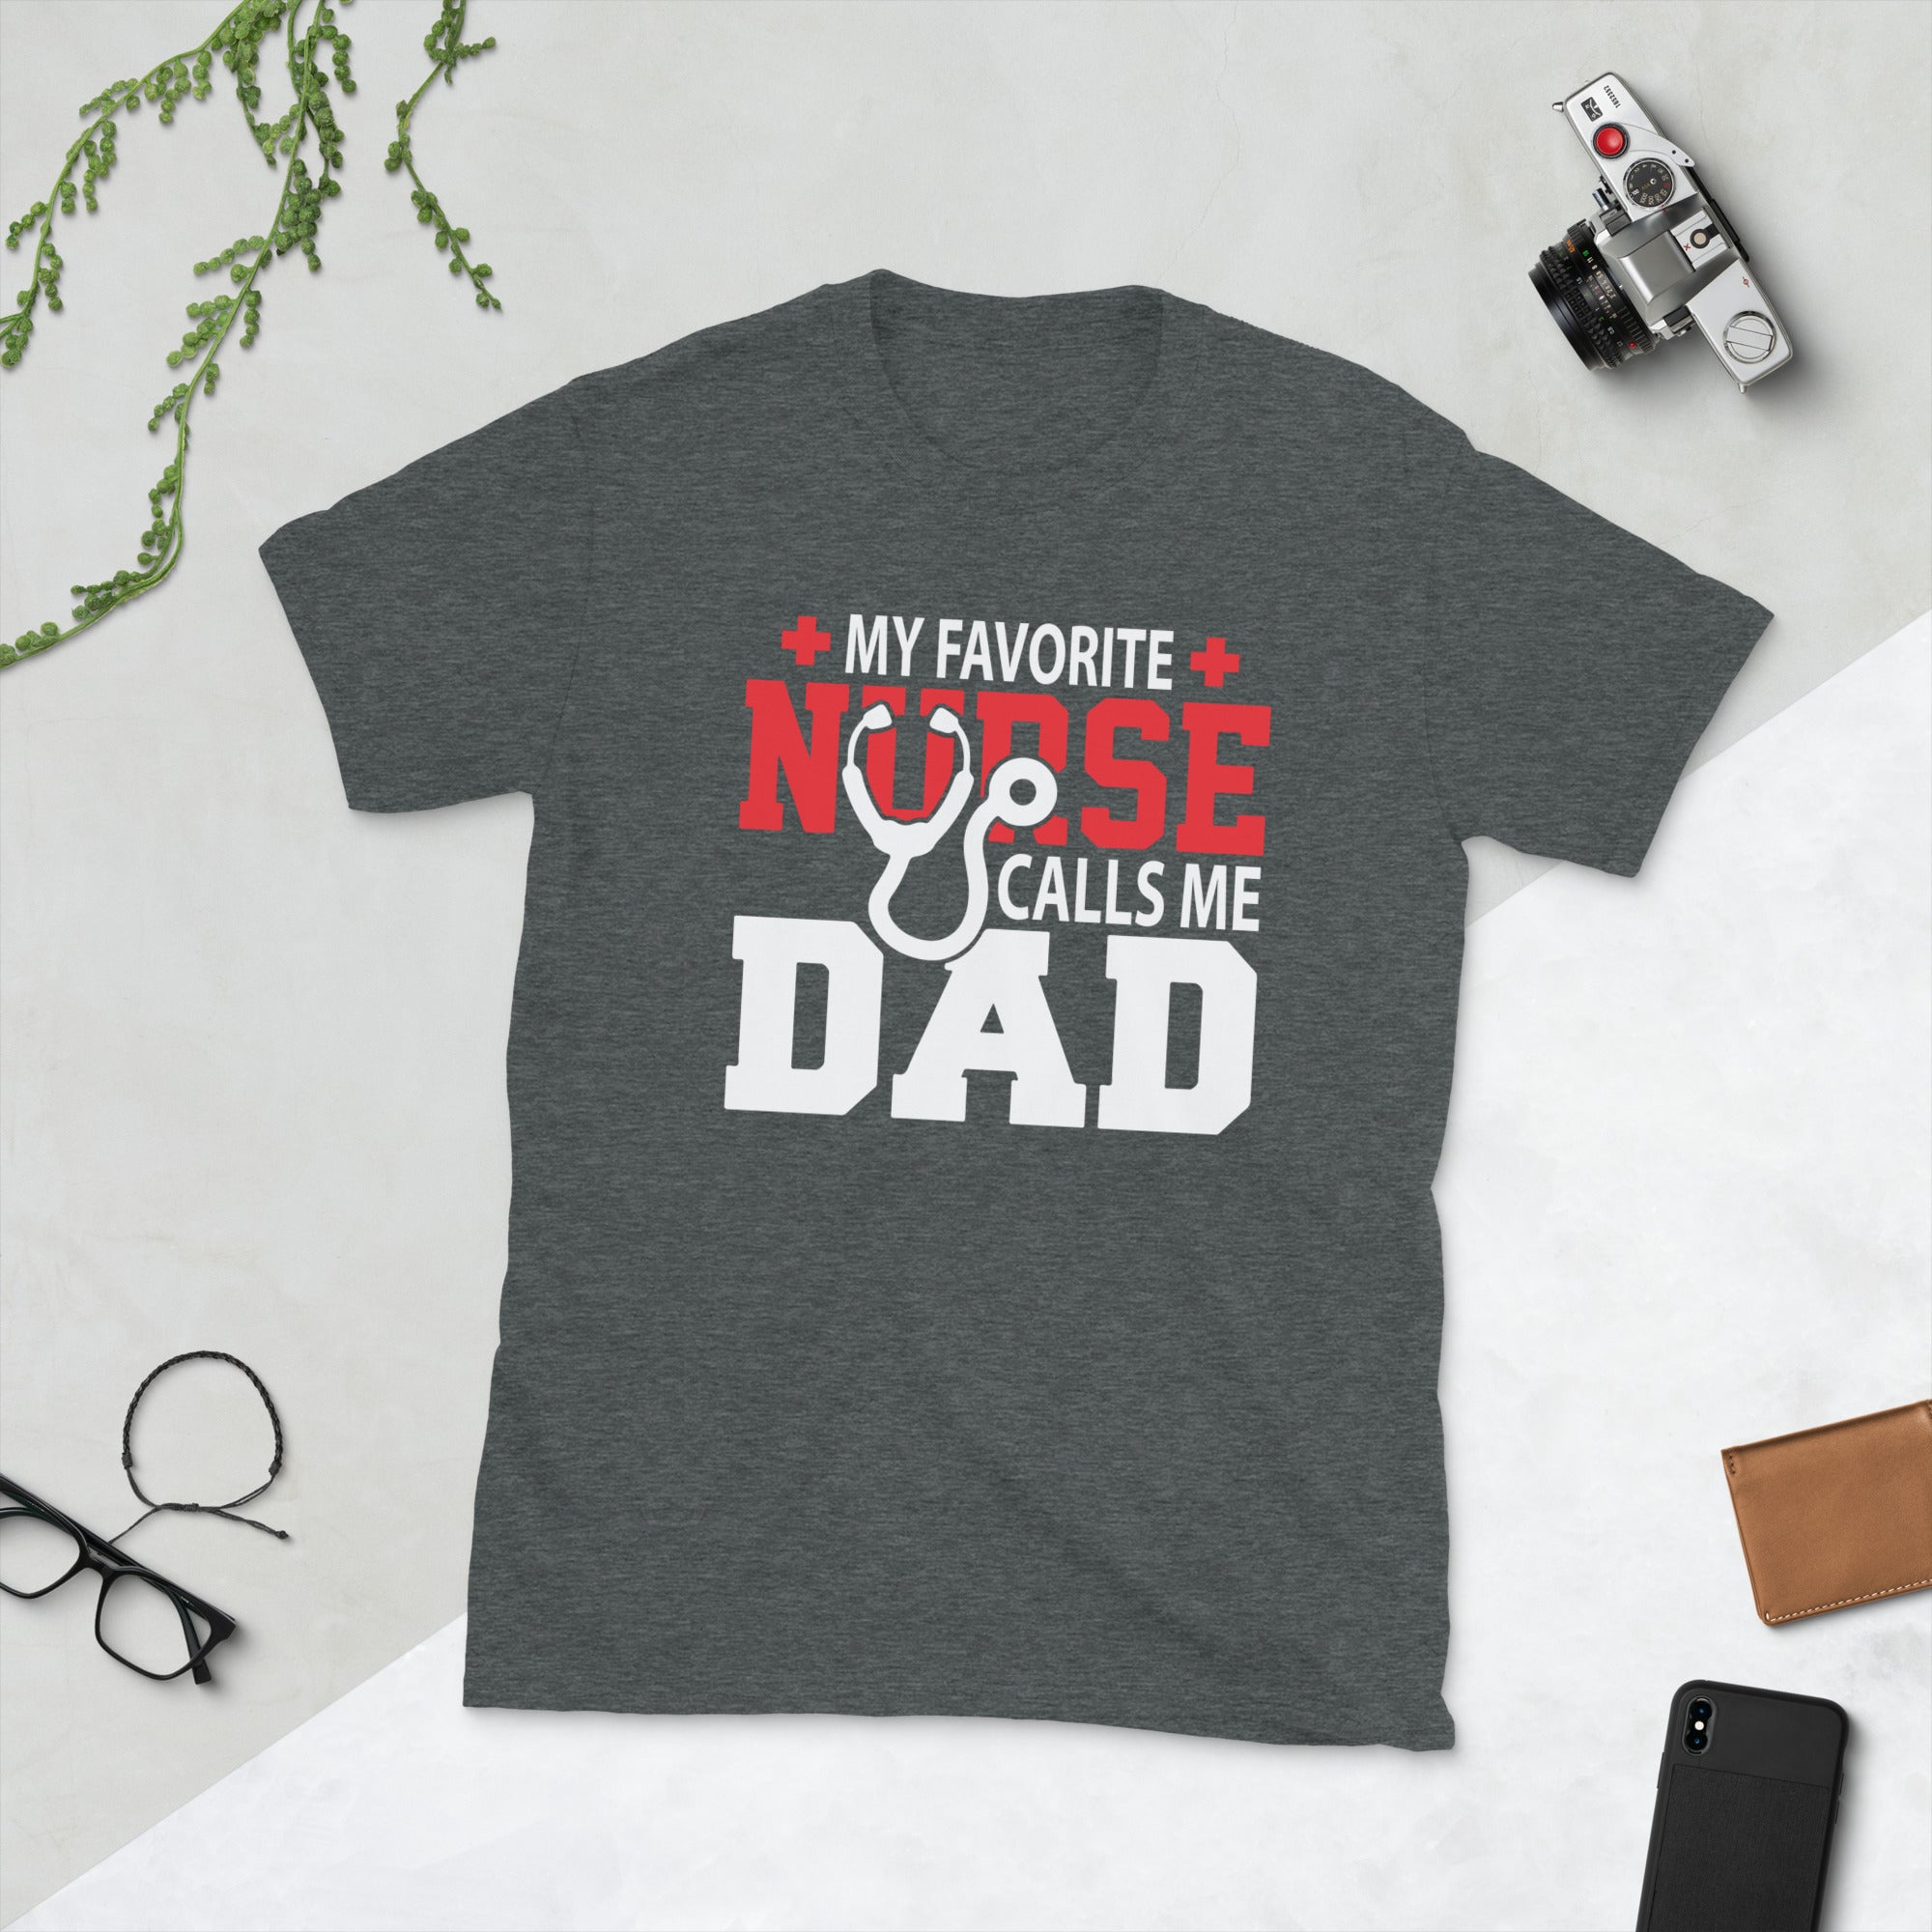 My Favorite Nurse Calls Me Dad Shirt, Birthday Fathers Day Gift for Proud Dad of a Nurse, Nurse Dad Shirt, Father Daughter Nurse Gift Shirt - Madeinsea©